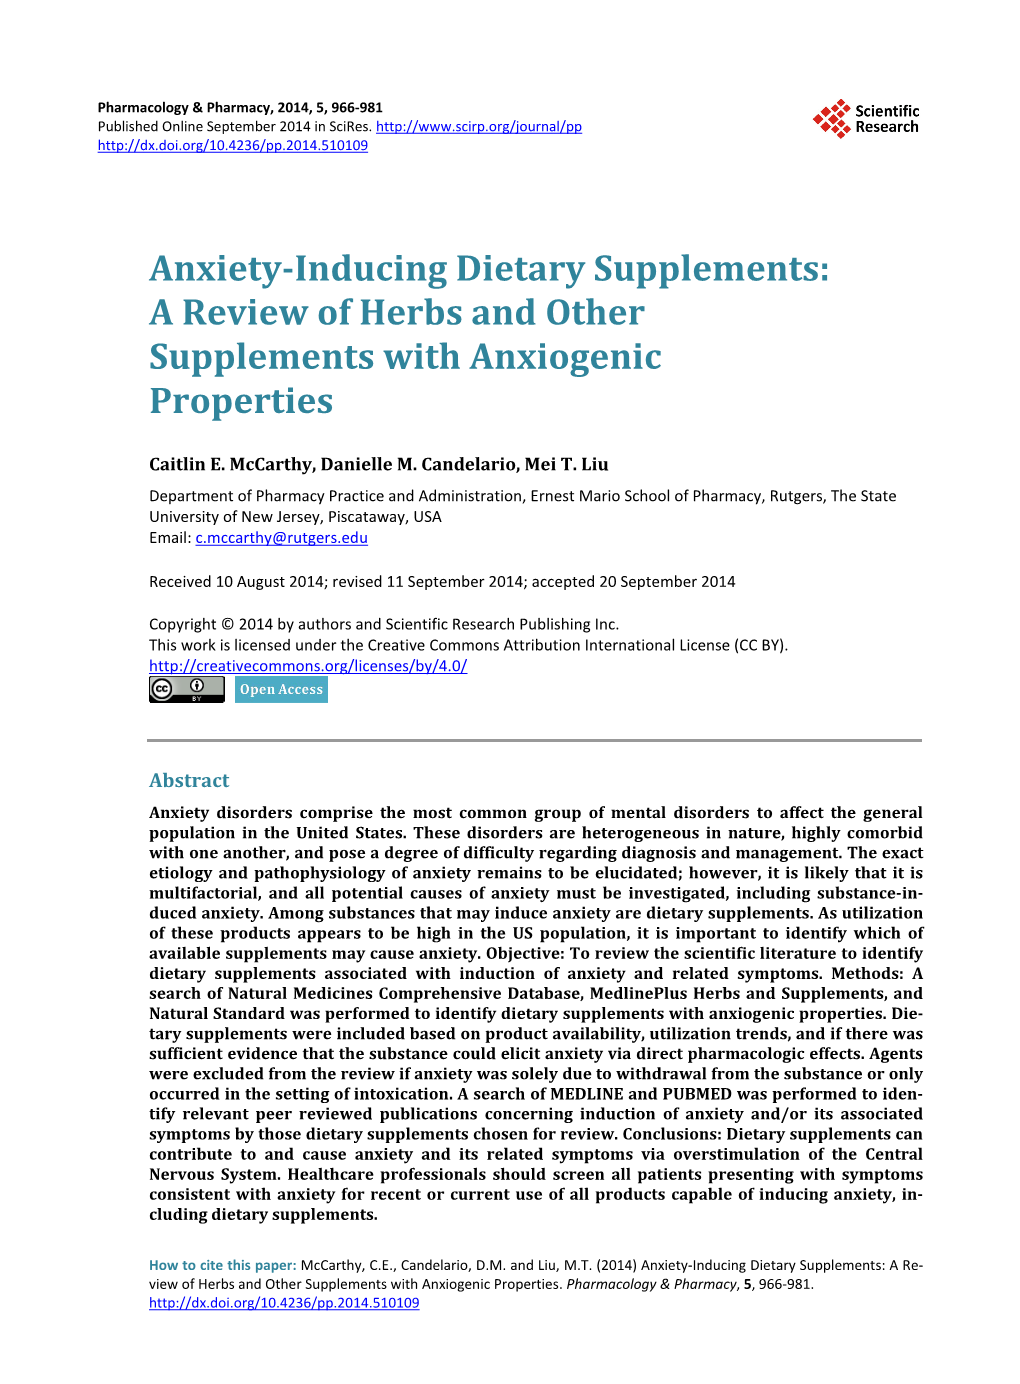 Anxiety-Inducing Dietary Supplements: a Review of Herbs and Other Supplements with Anxiogenic Properties